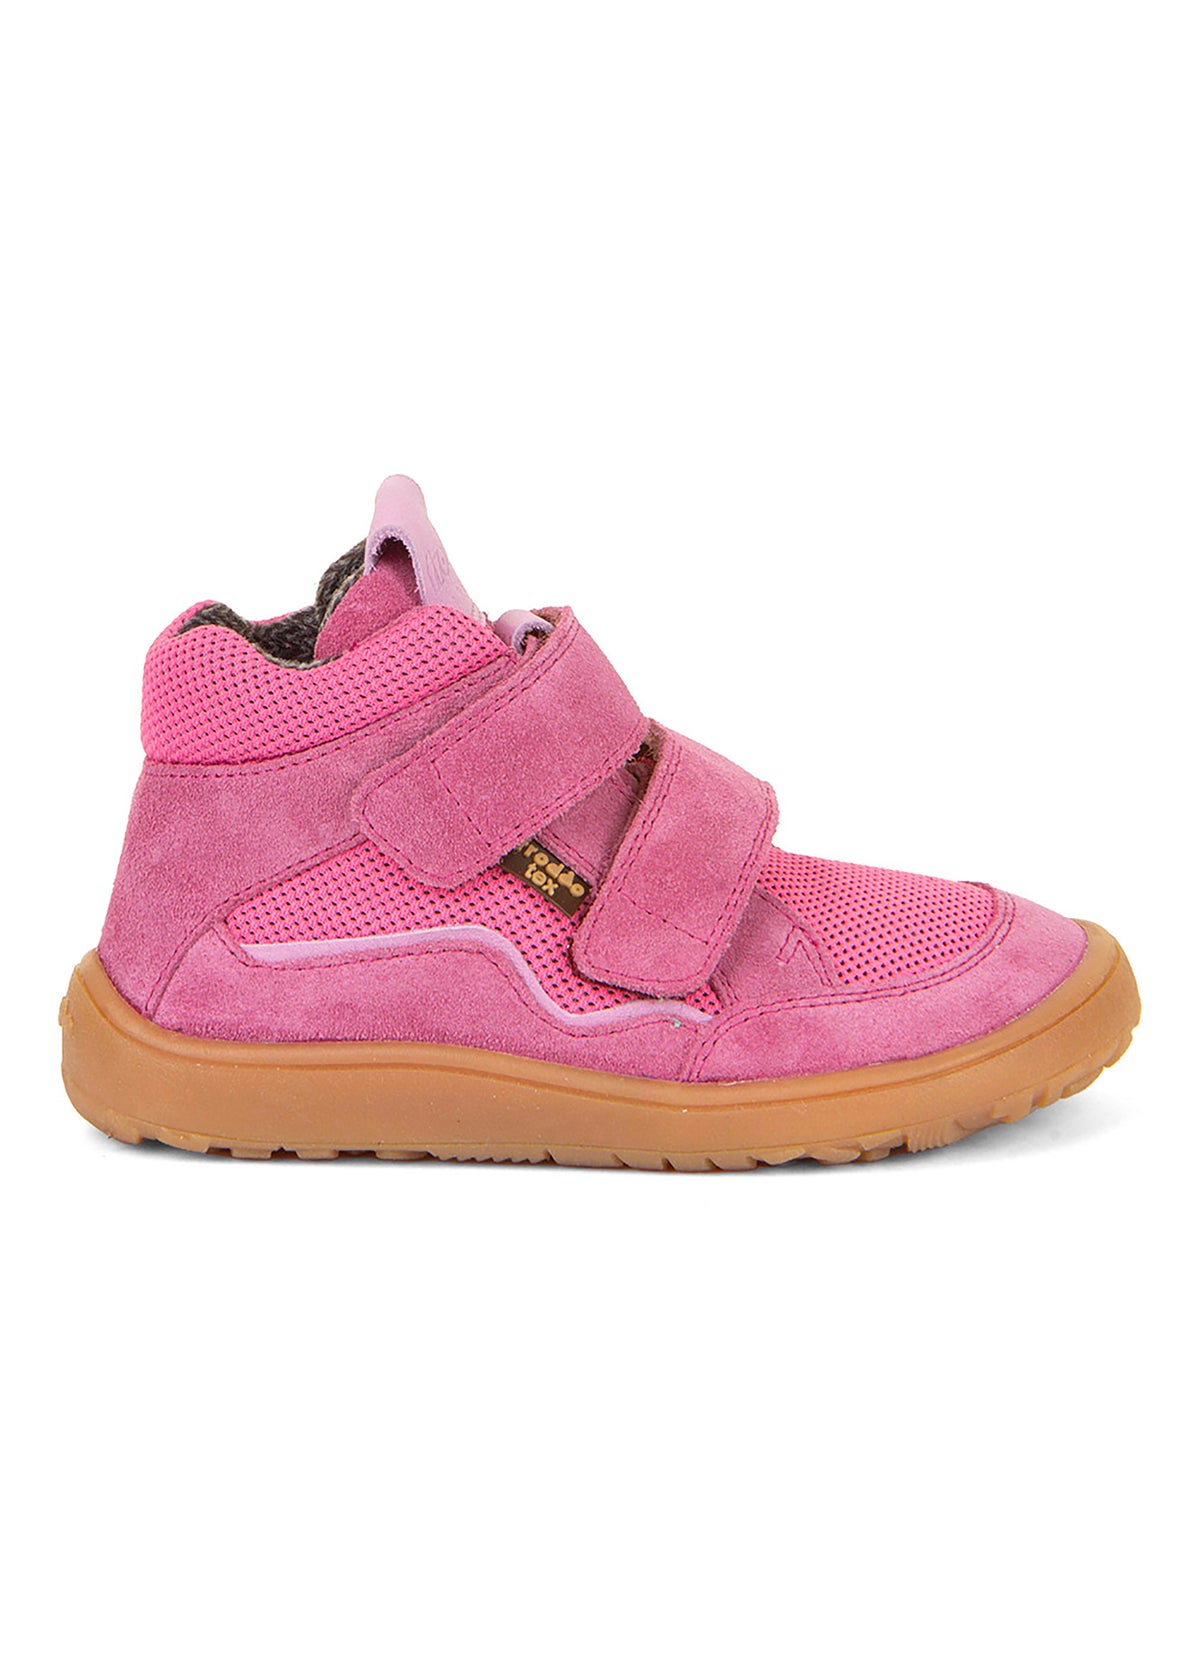 Barefoot sneakers with handles - mid-season shoes, Spring-TEX, pink